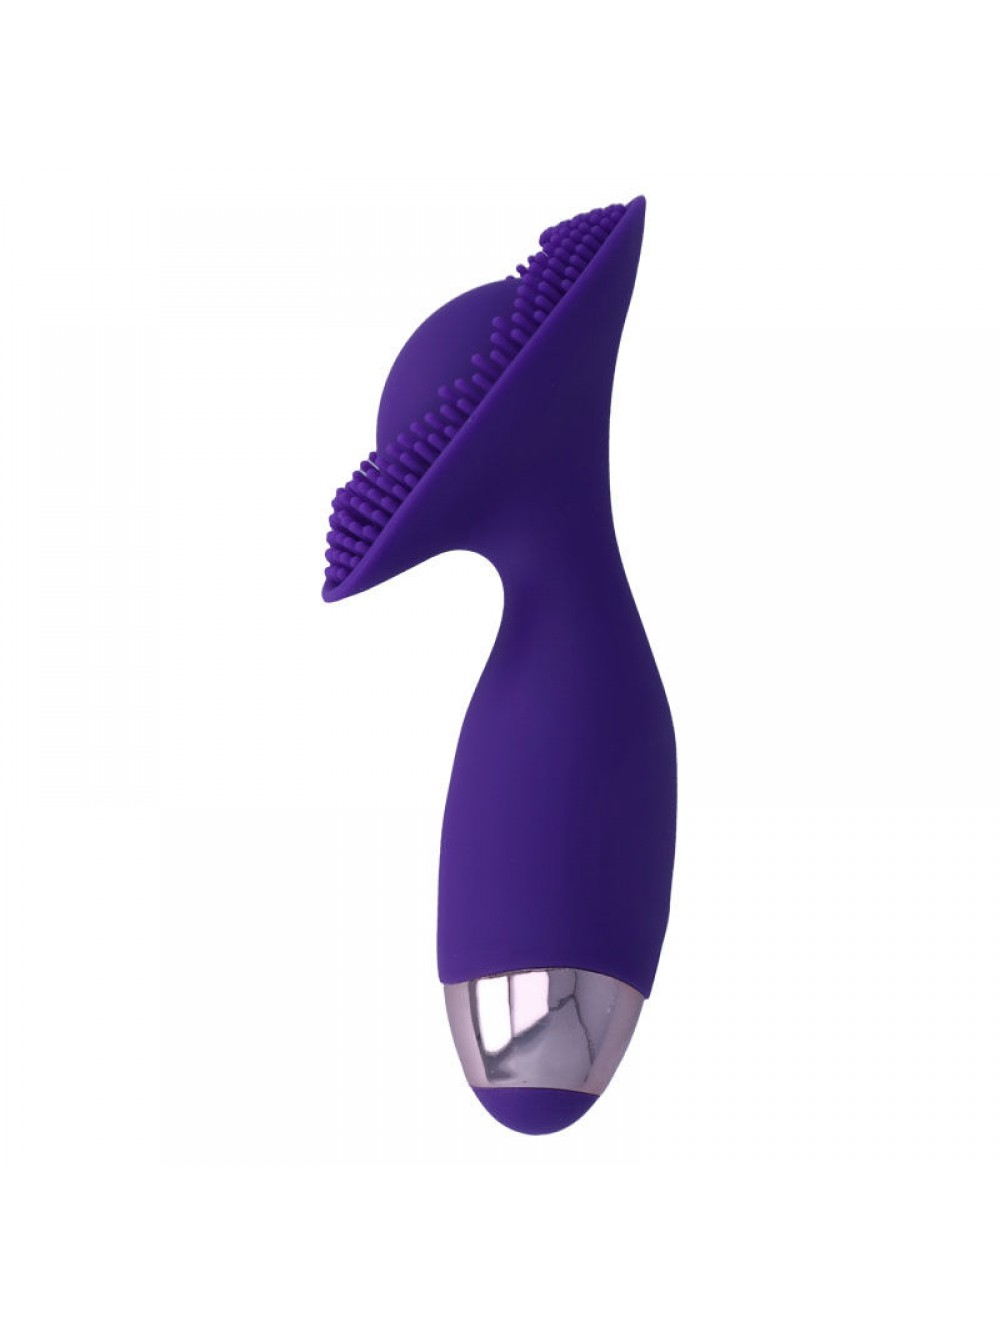 PUPPY RECHARGEABLE SILICONE STIMULATOR